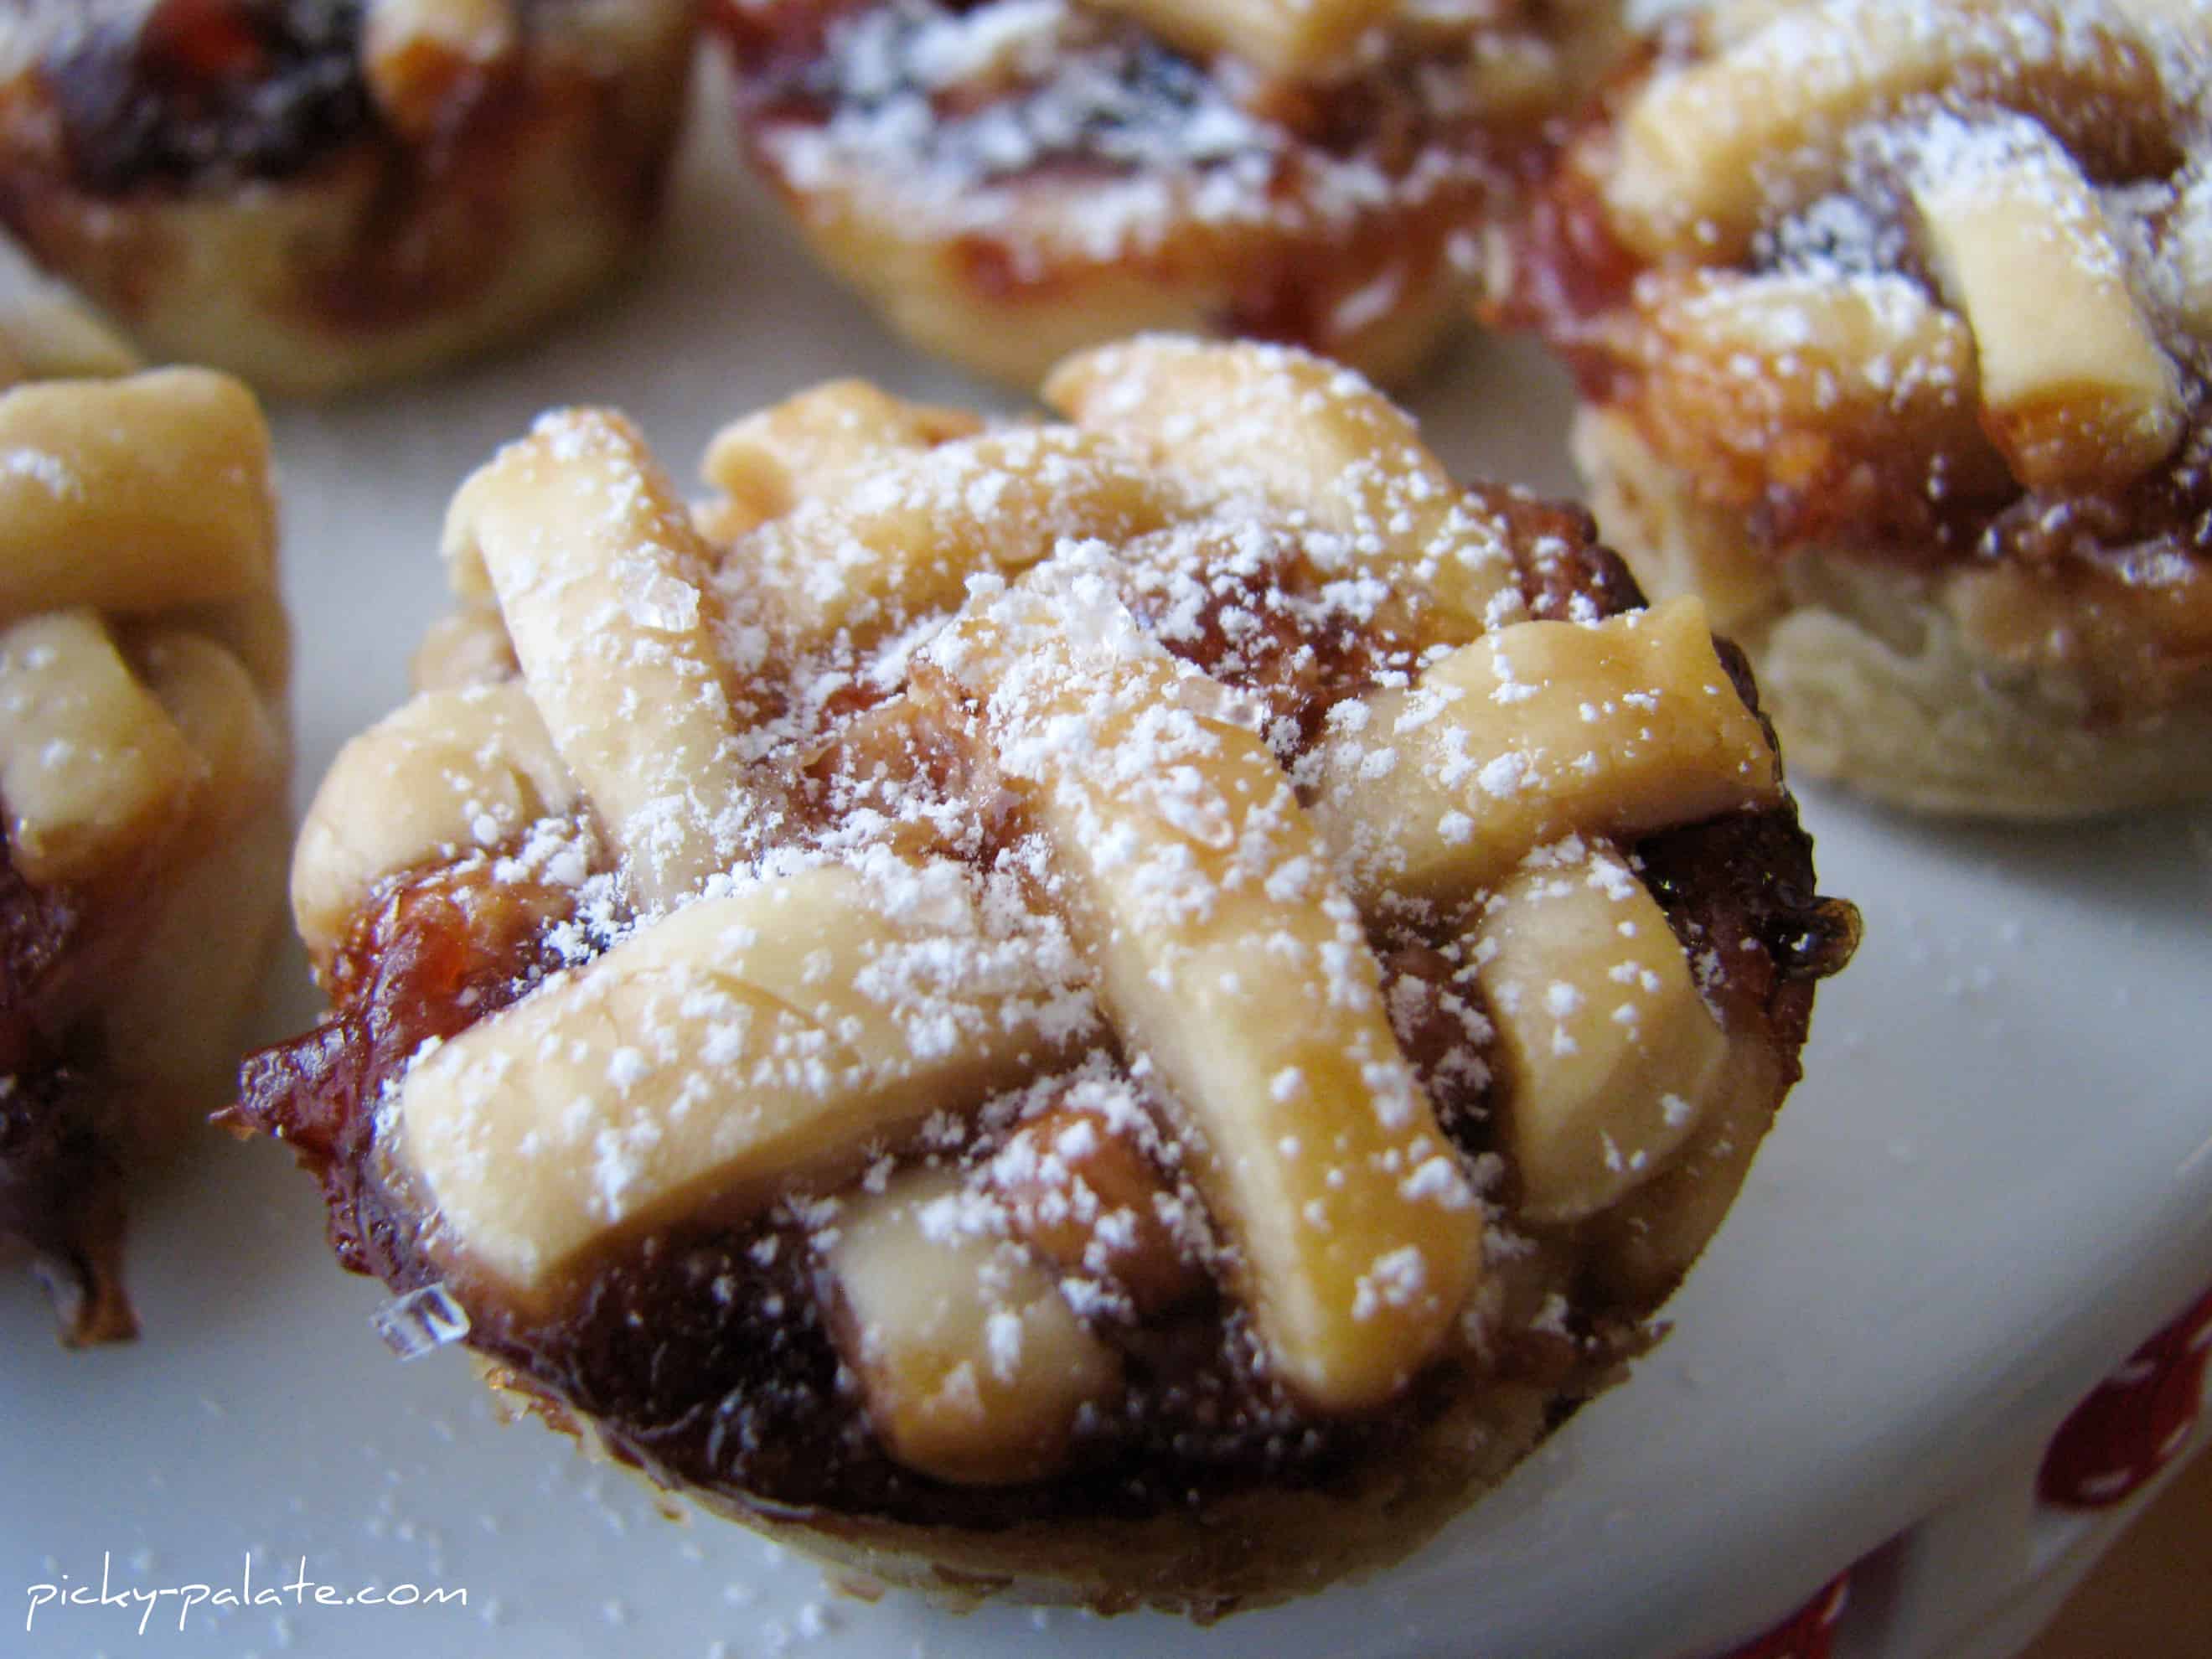 Close up of a baked peanut butter and jelly mini pie dusted with powdered sugar.